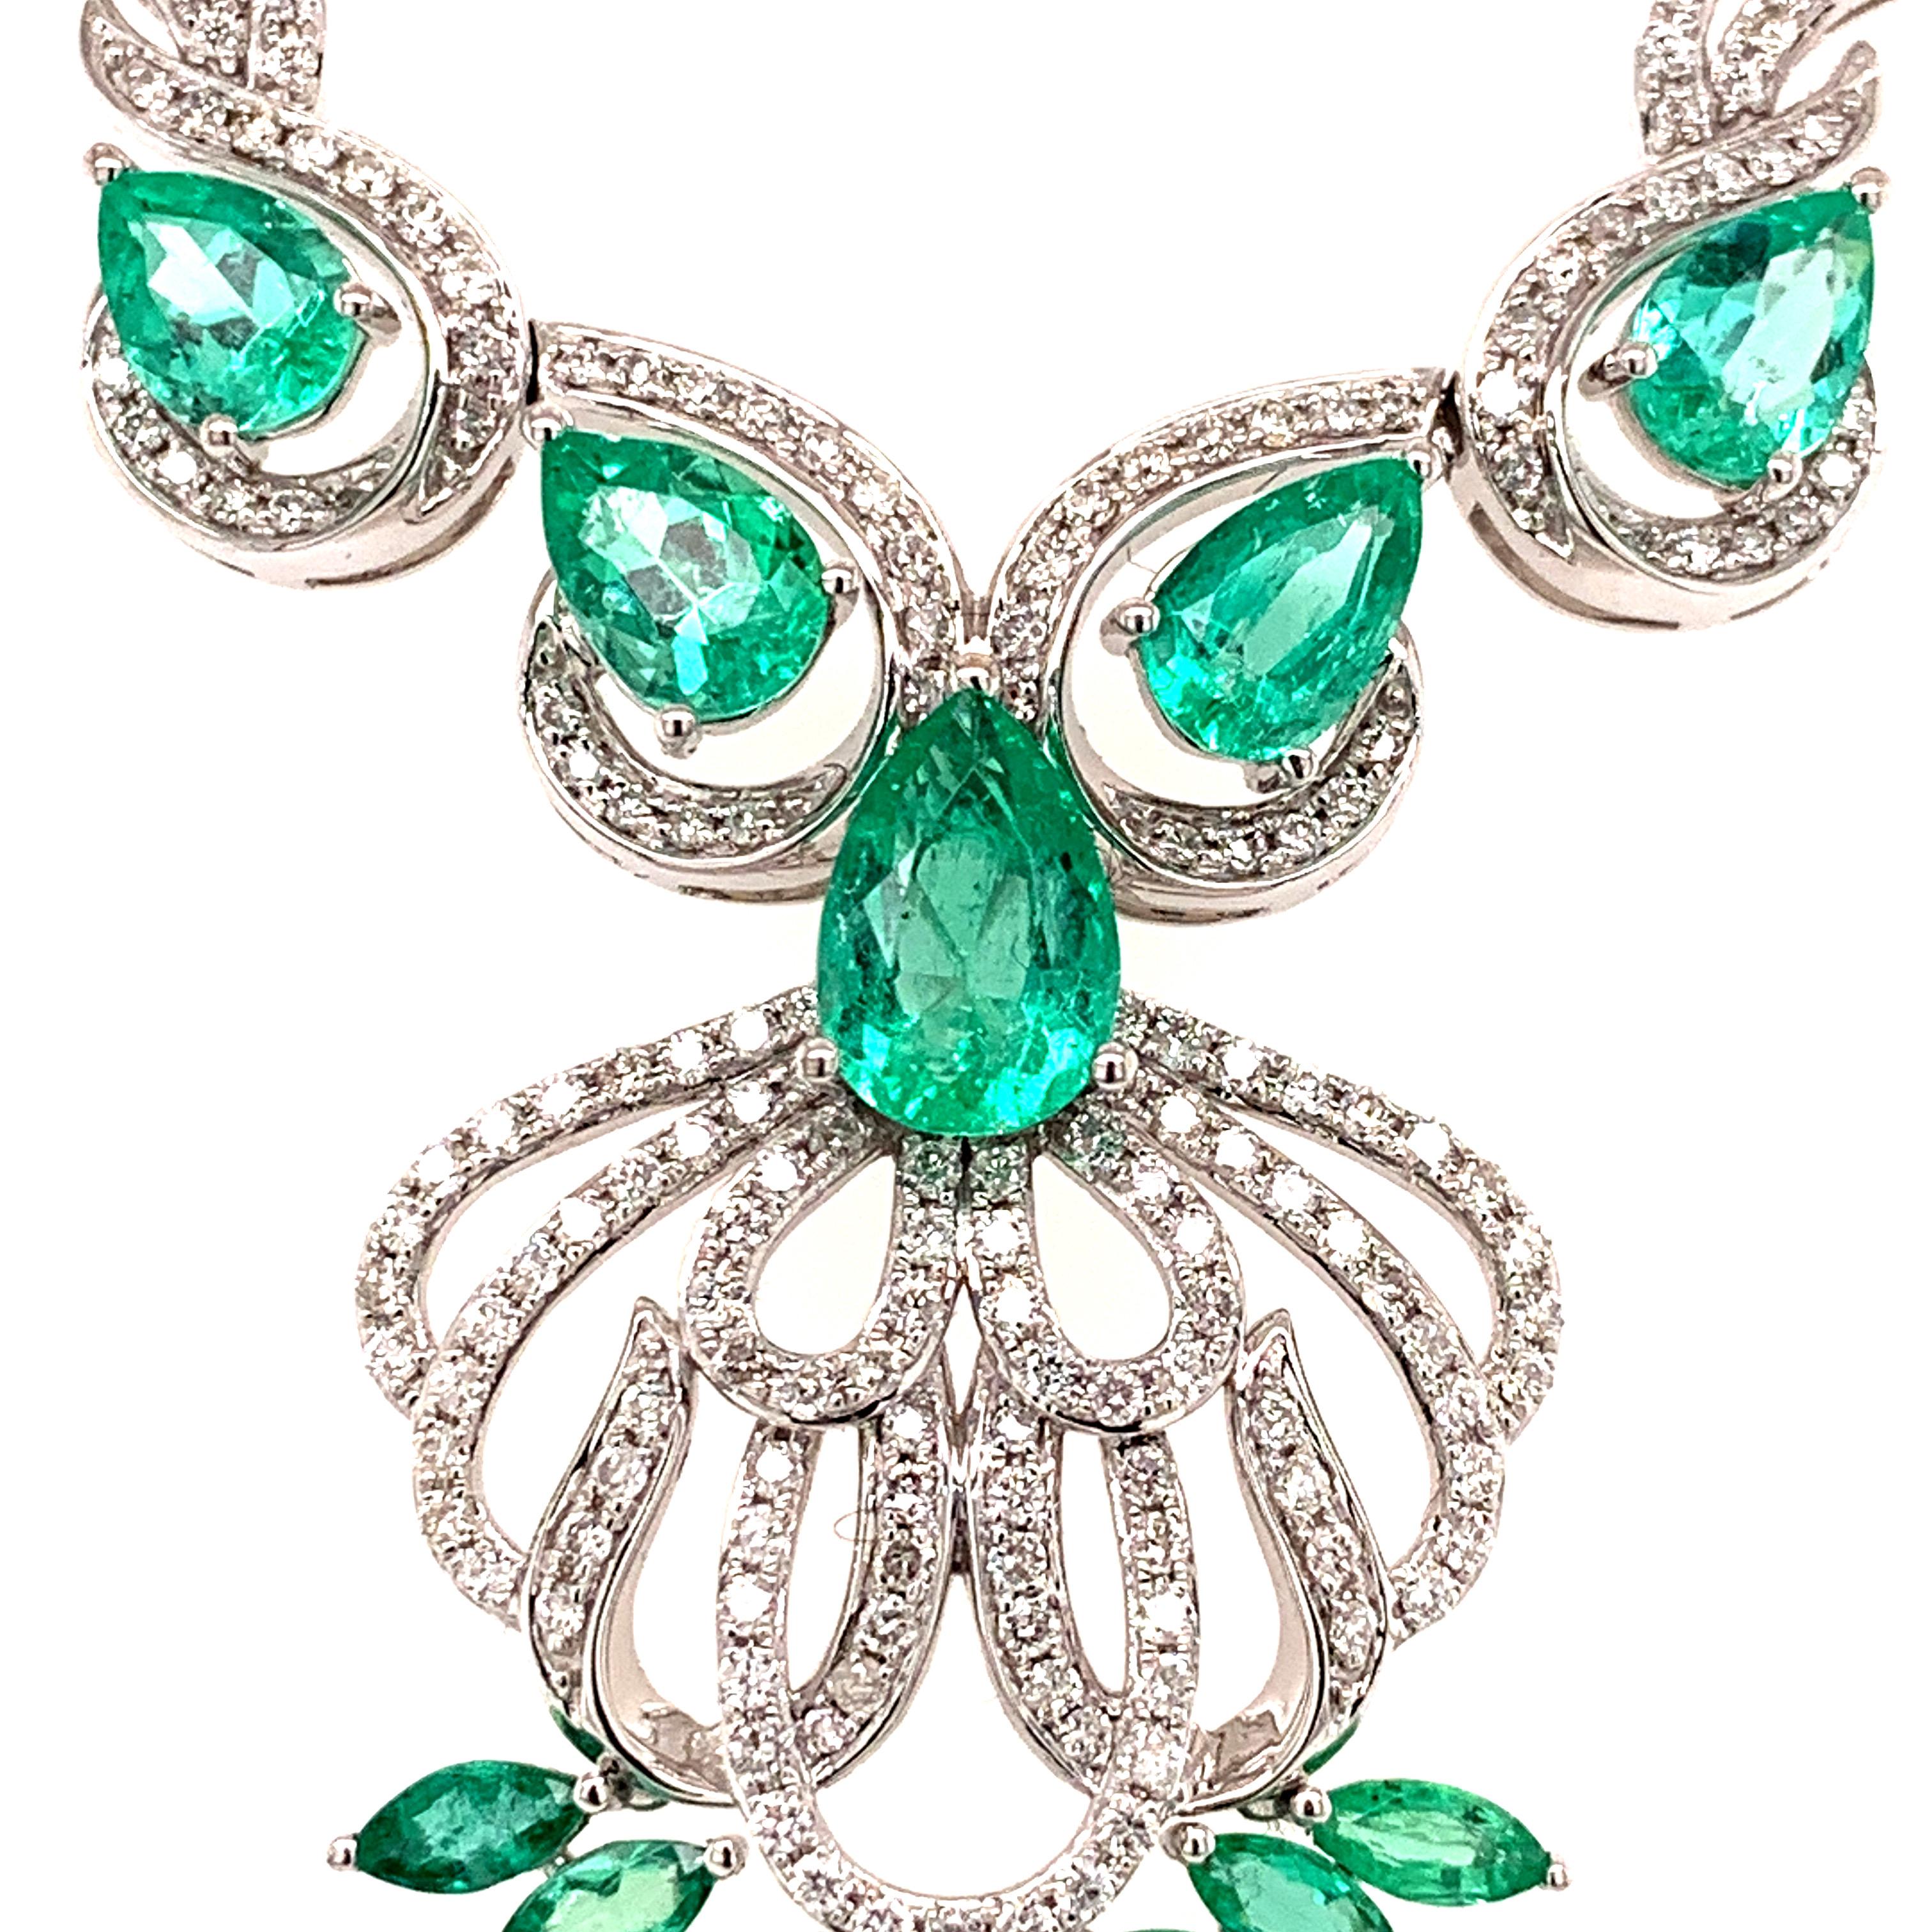 Elegant emerald diamond necklace. Lively green, high luster, pear, marquise faceted, 5.17 carats emeralds mounted in high profile open basket, accented with round brilliant cut diamonds. Handcrafted design set in high polished 14 karat white gold